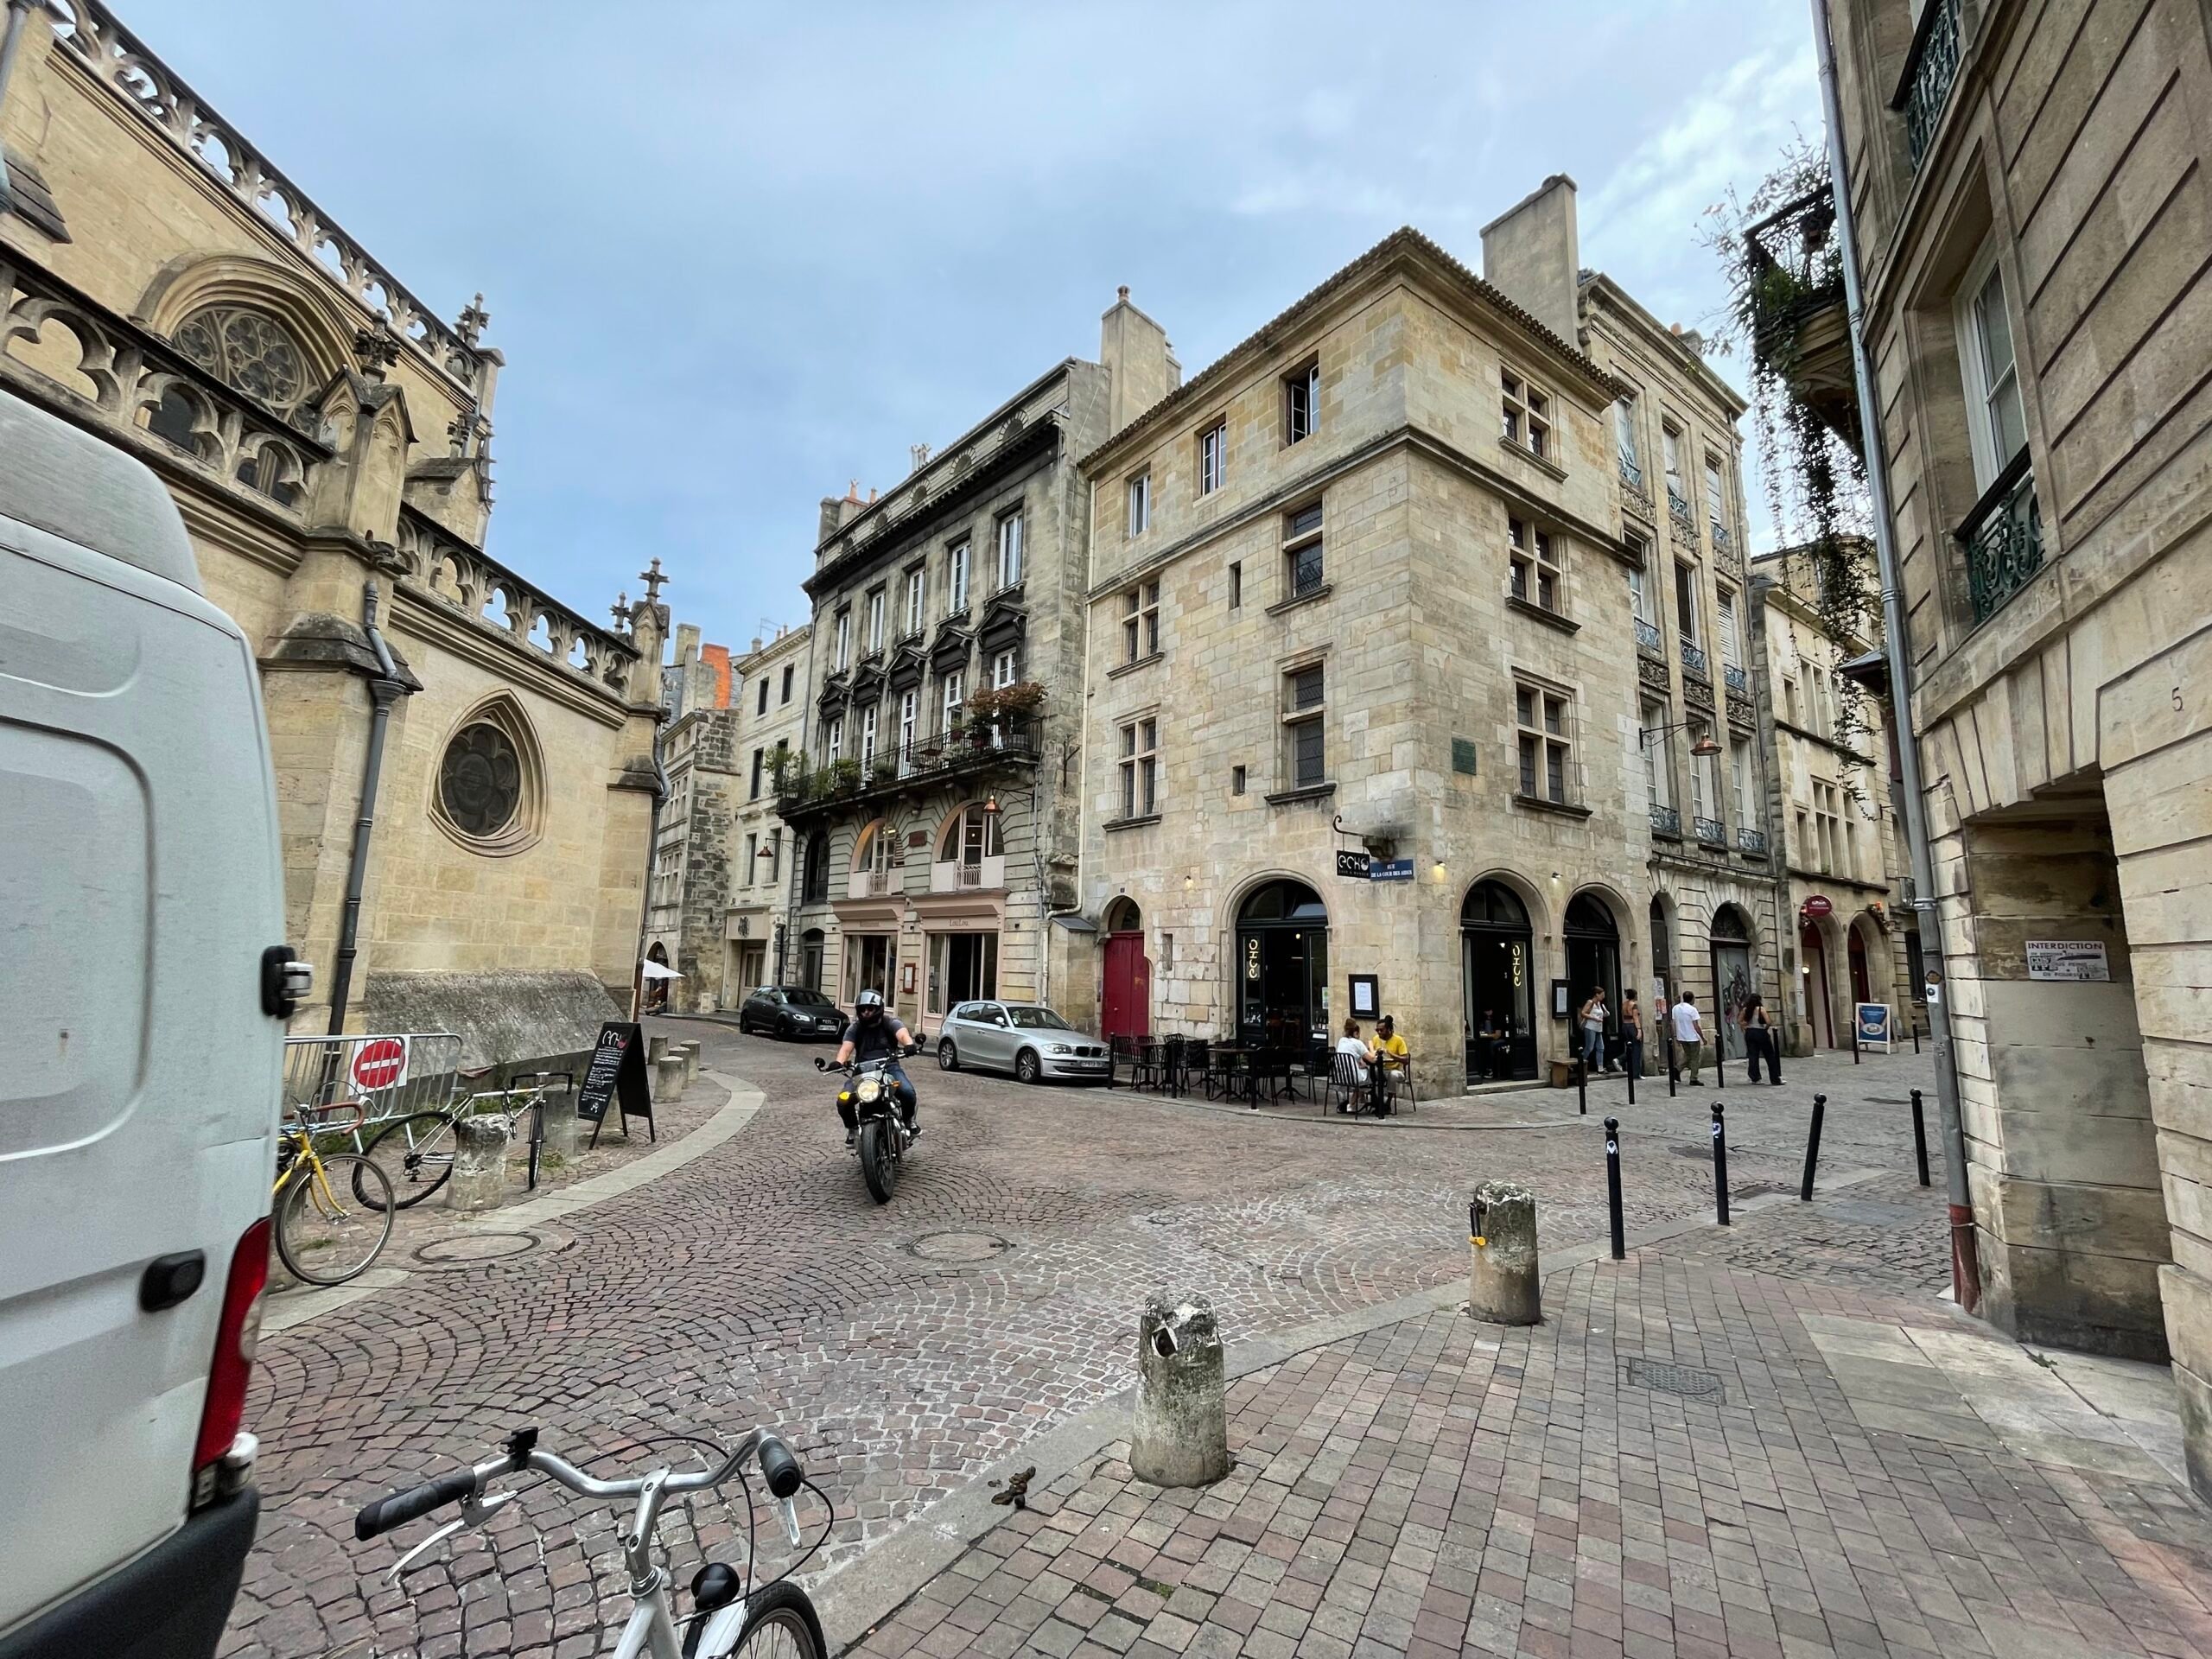 A view of Bordeaux's narrow streets with old stone buildings, featuring a person riding a motorcycle and people strolling.
